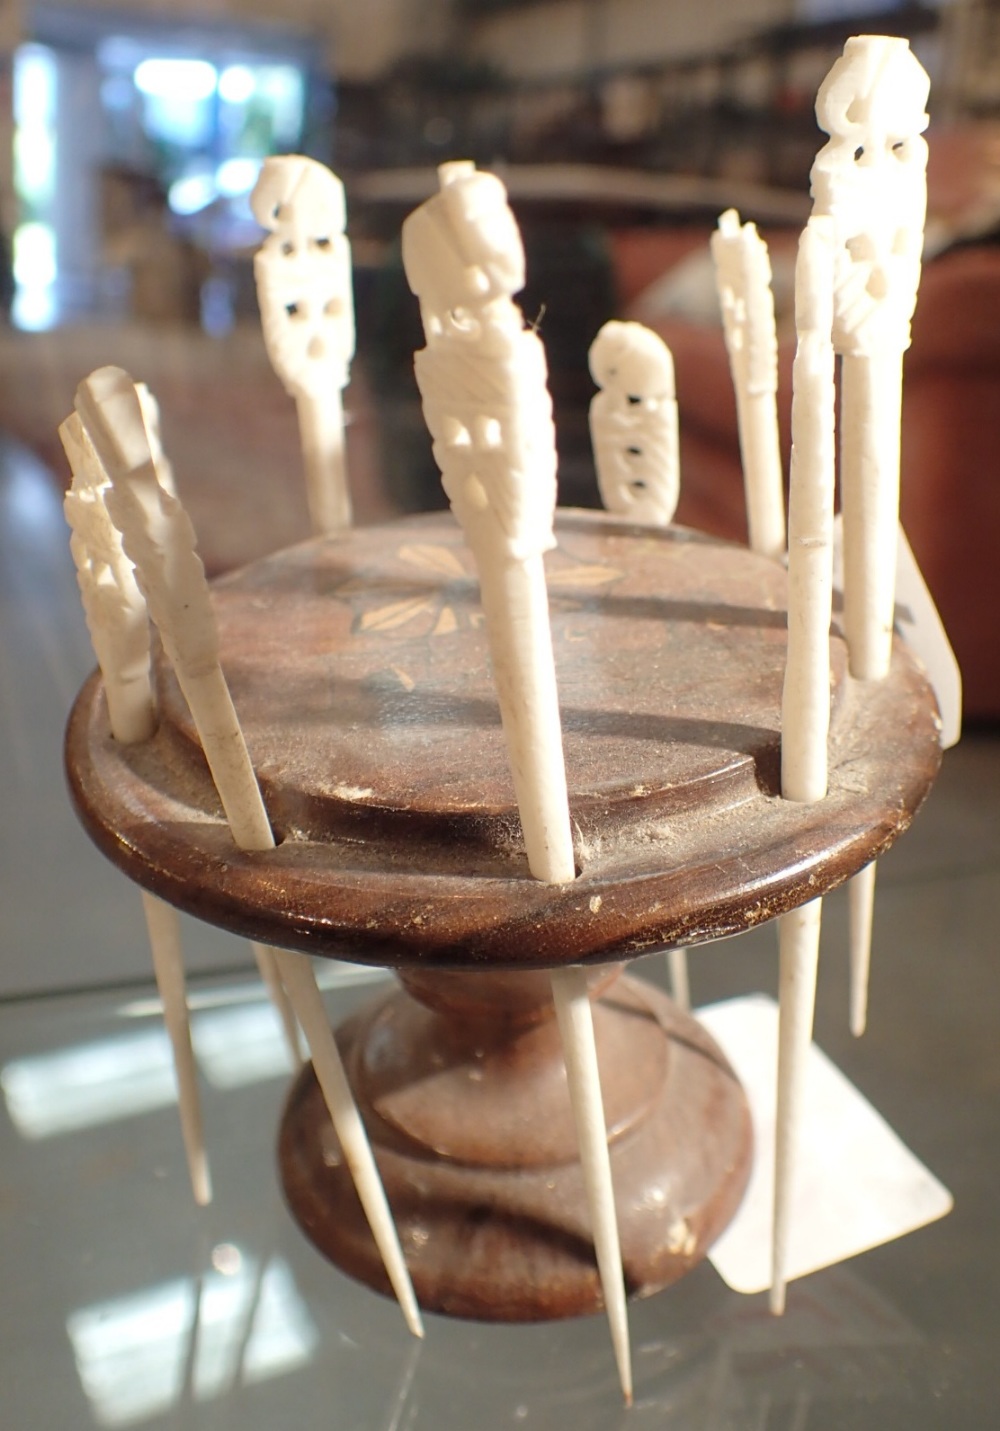 Carved bone cocktail sticks on an inlaid wooden base